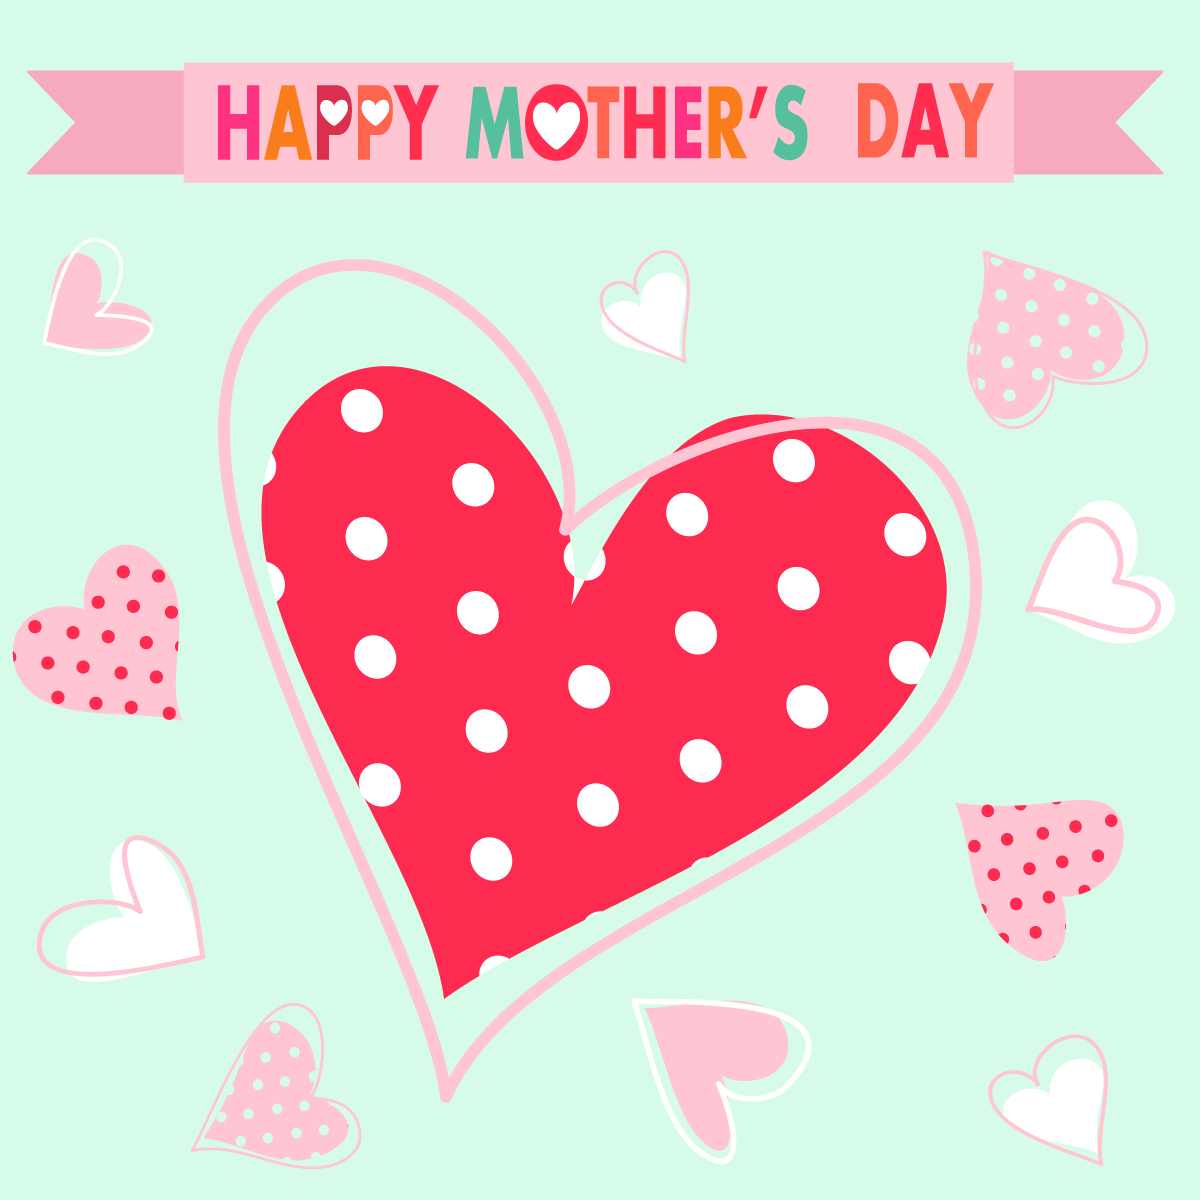 Happy Mother's Day card with red and white polka dotted hearts on it.